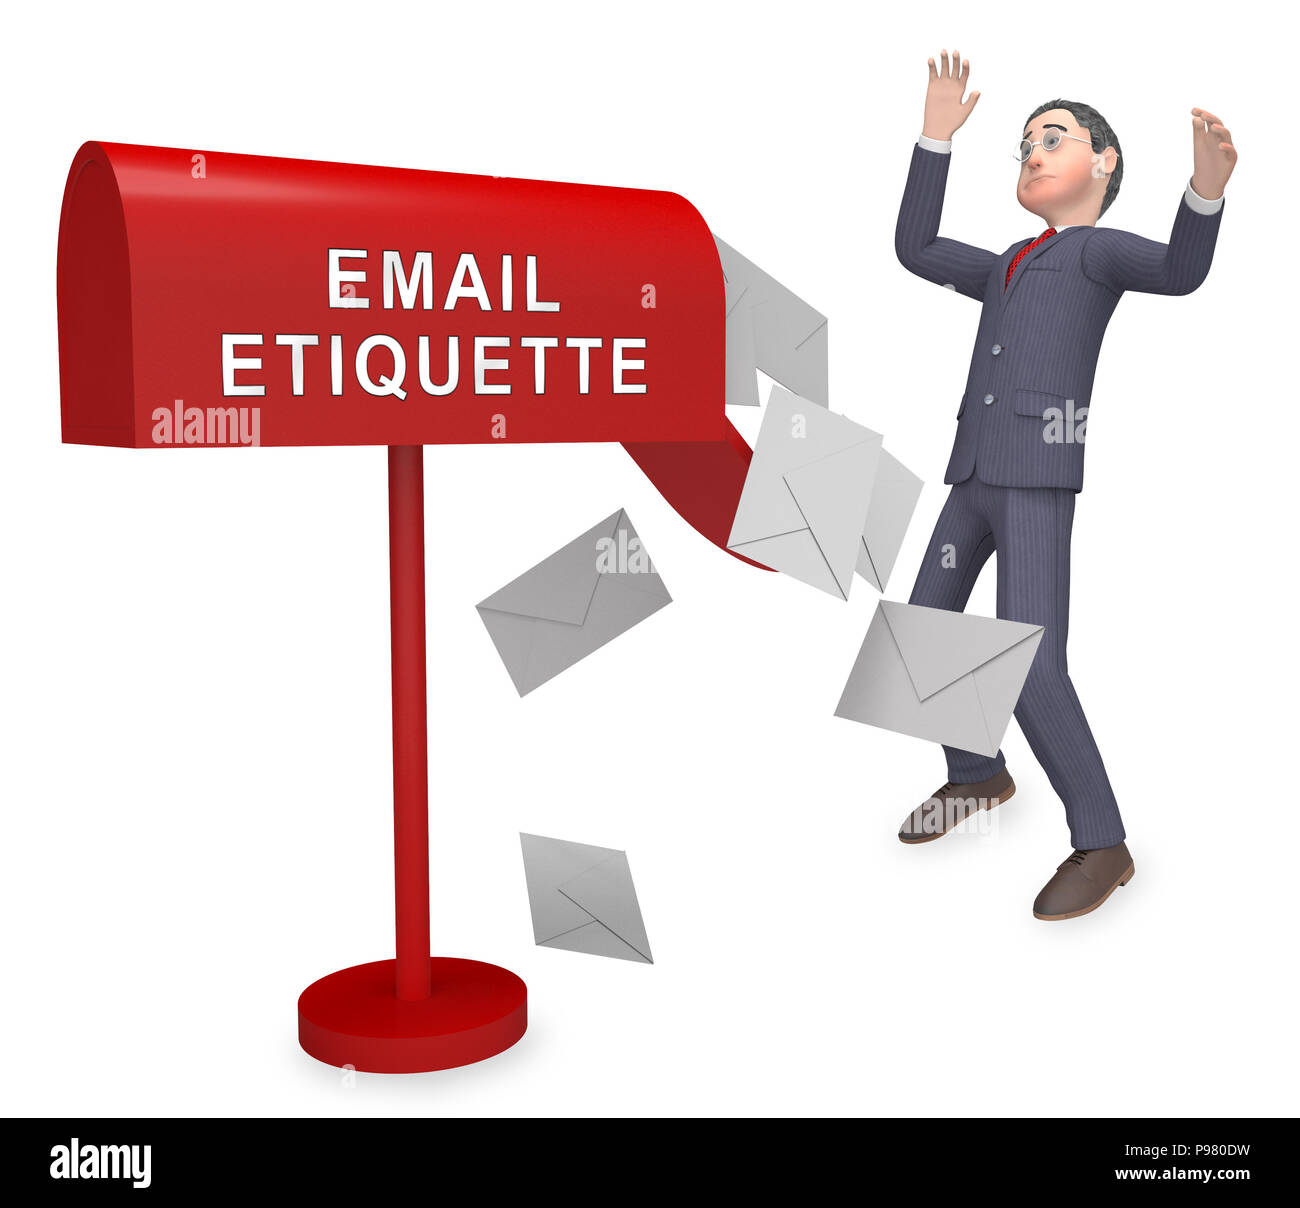 Email Etiquette Electronic Message Rules 3d Rendering Shows Proper Electronic Mail Polite Correspondence To Send Promotions Stock Photo